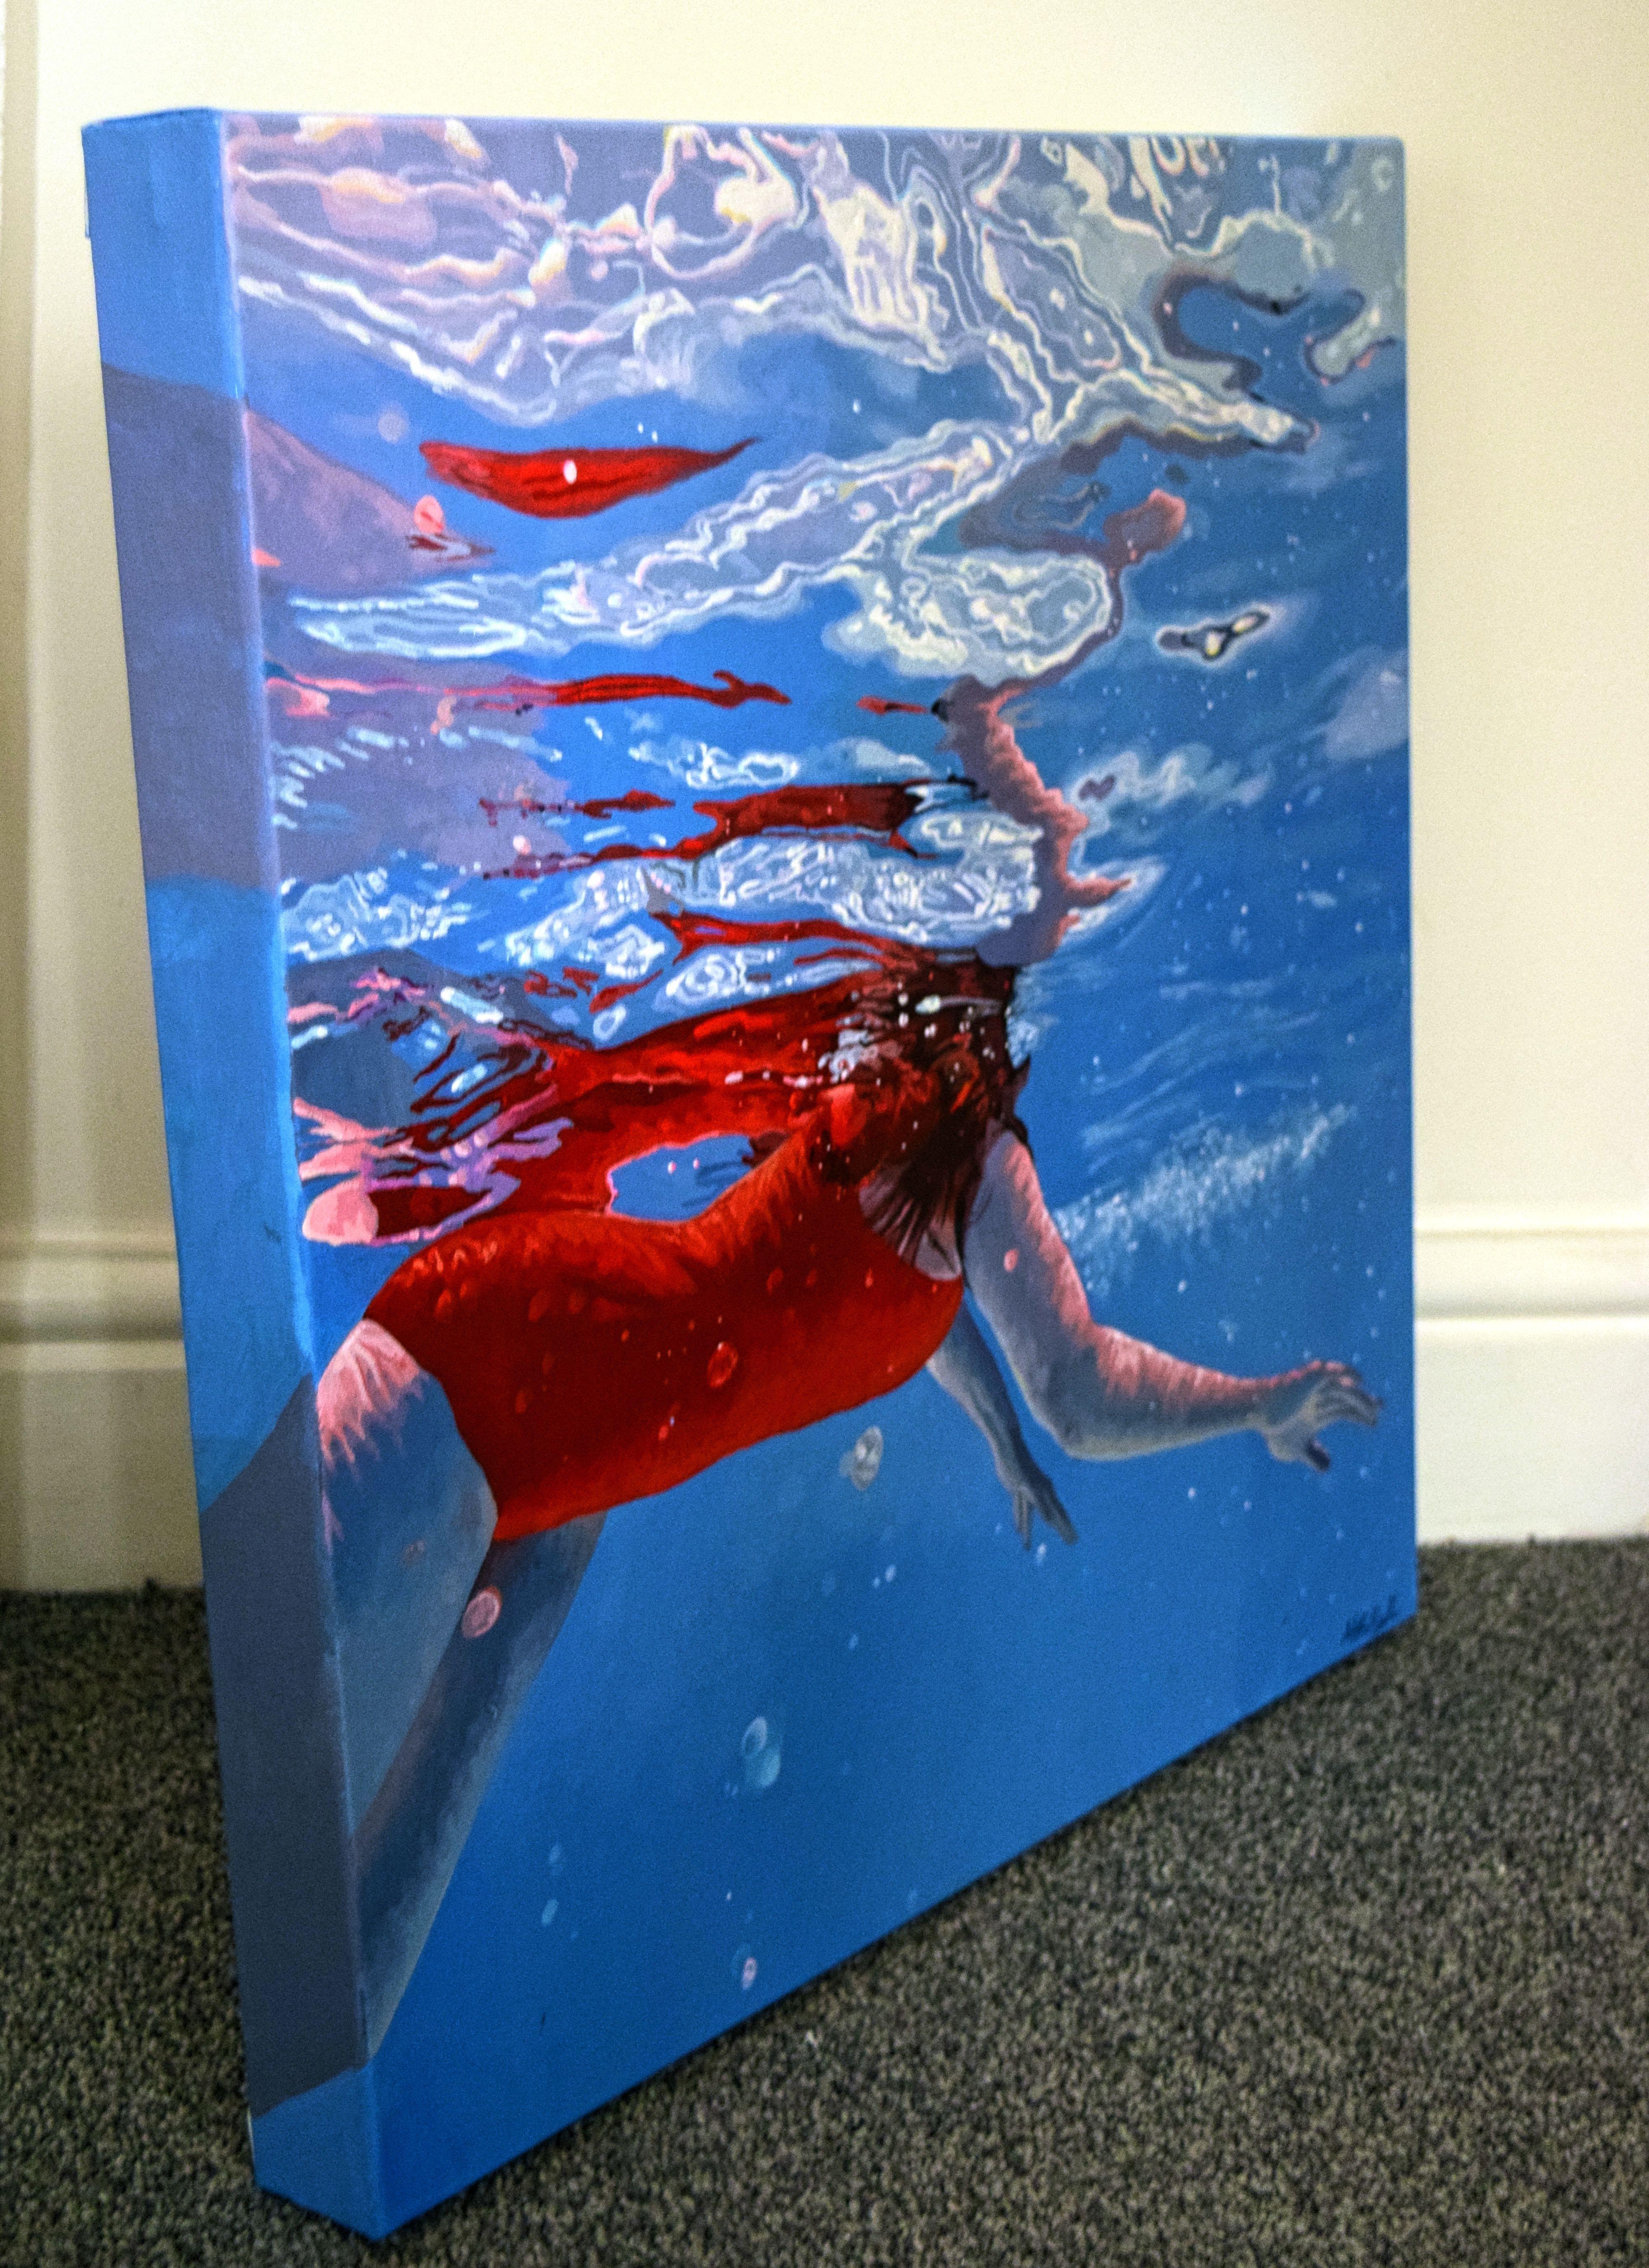 The swimmer's form is reflected in hundreds of shades of red and beautiful, intricate patterns in the water's surface.    This work is painted on a gallery wrapped, deep edged canvas. The painting continues around the edge and thus can be hung